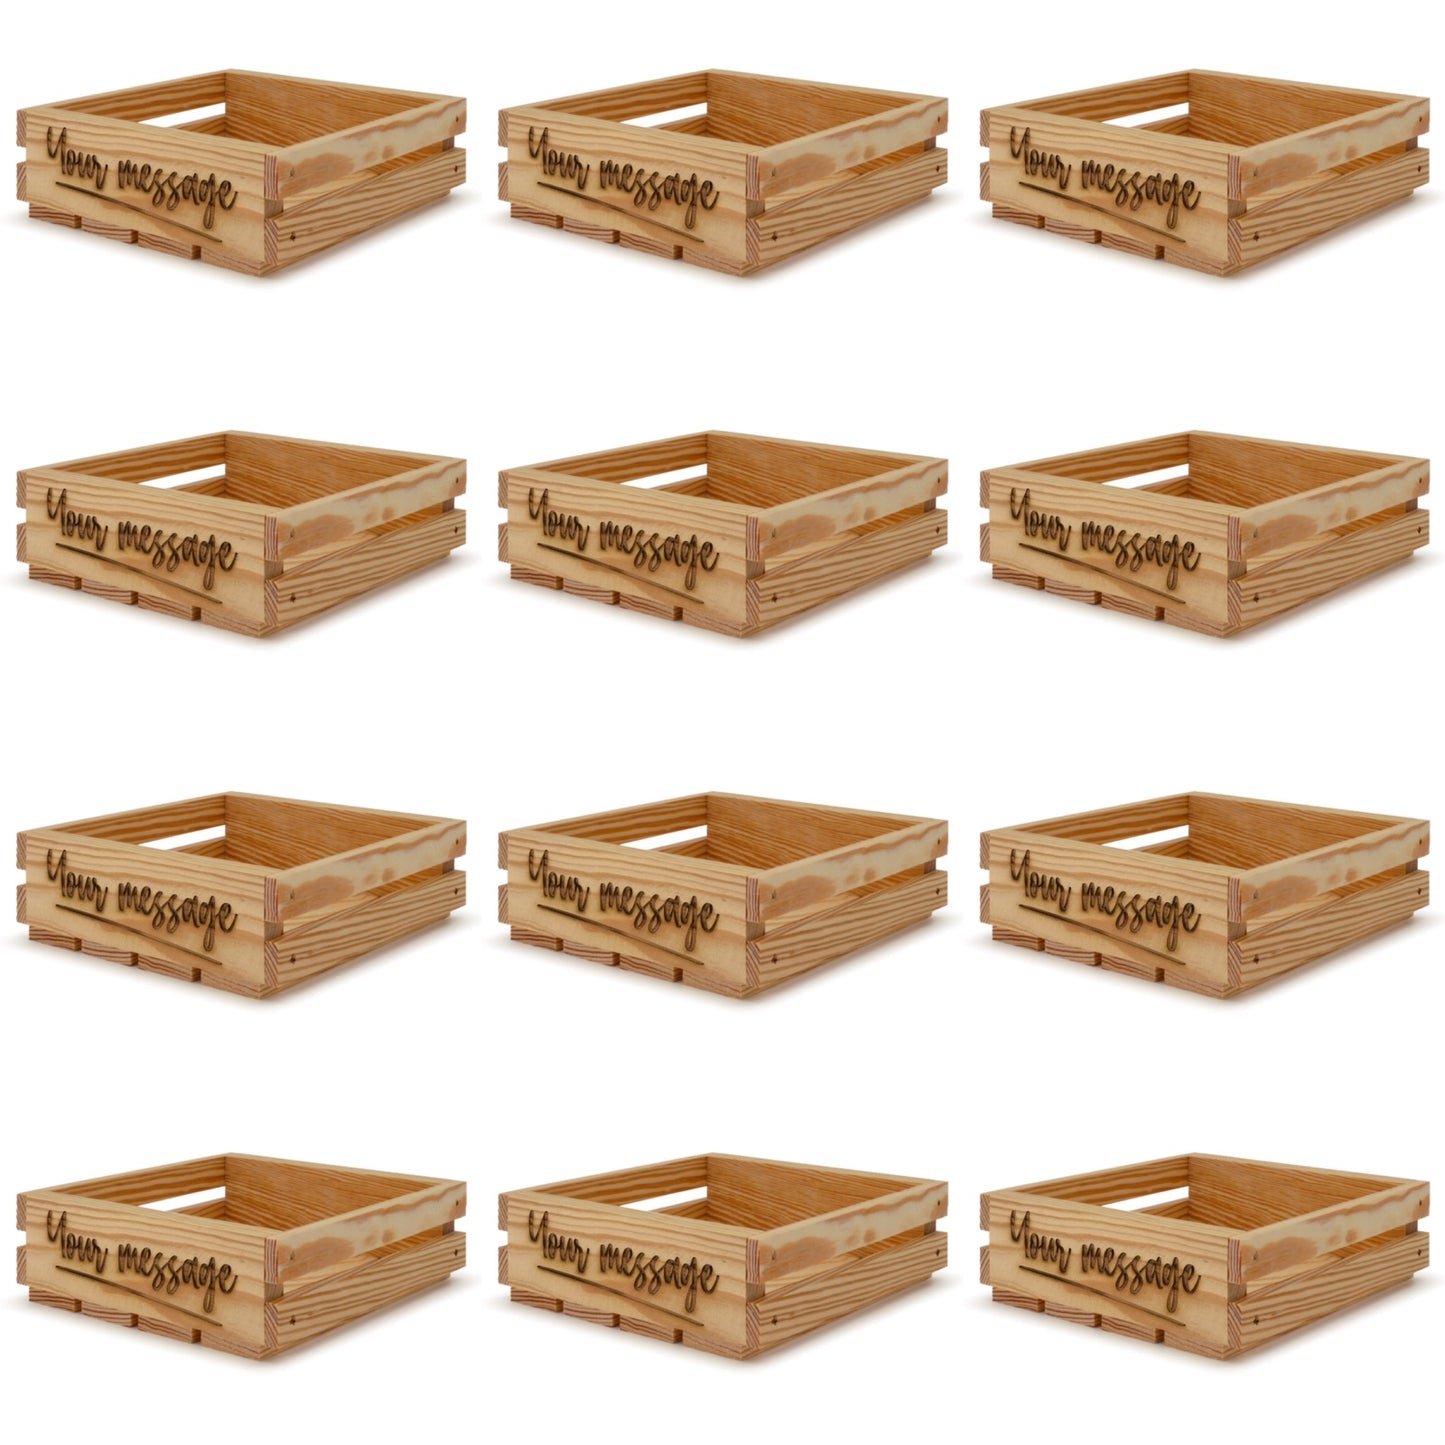 12 Small wooden crates 8x8x2.5 your message included